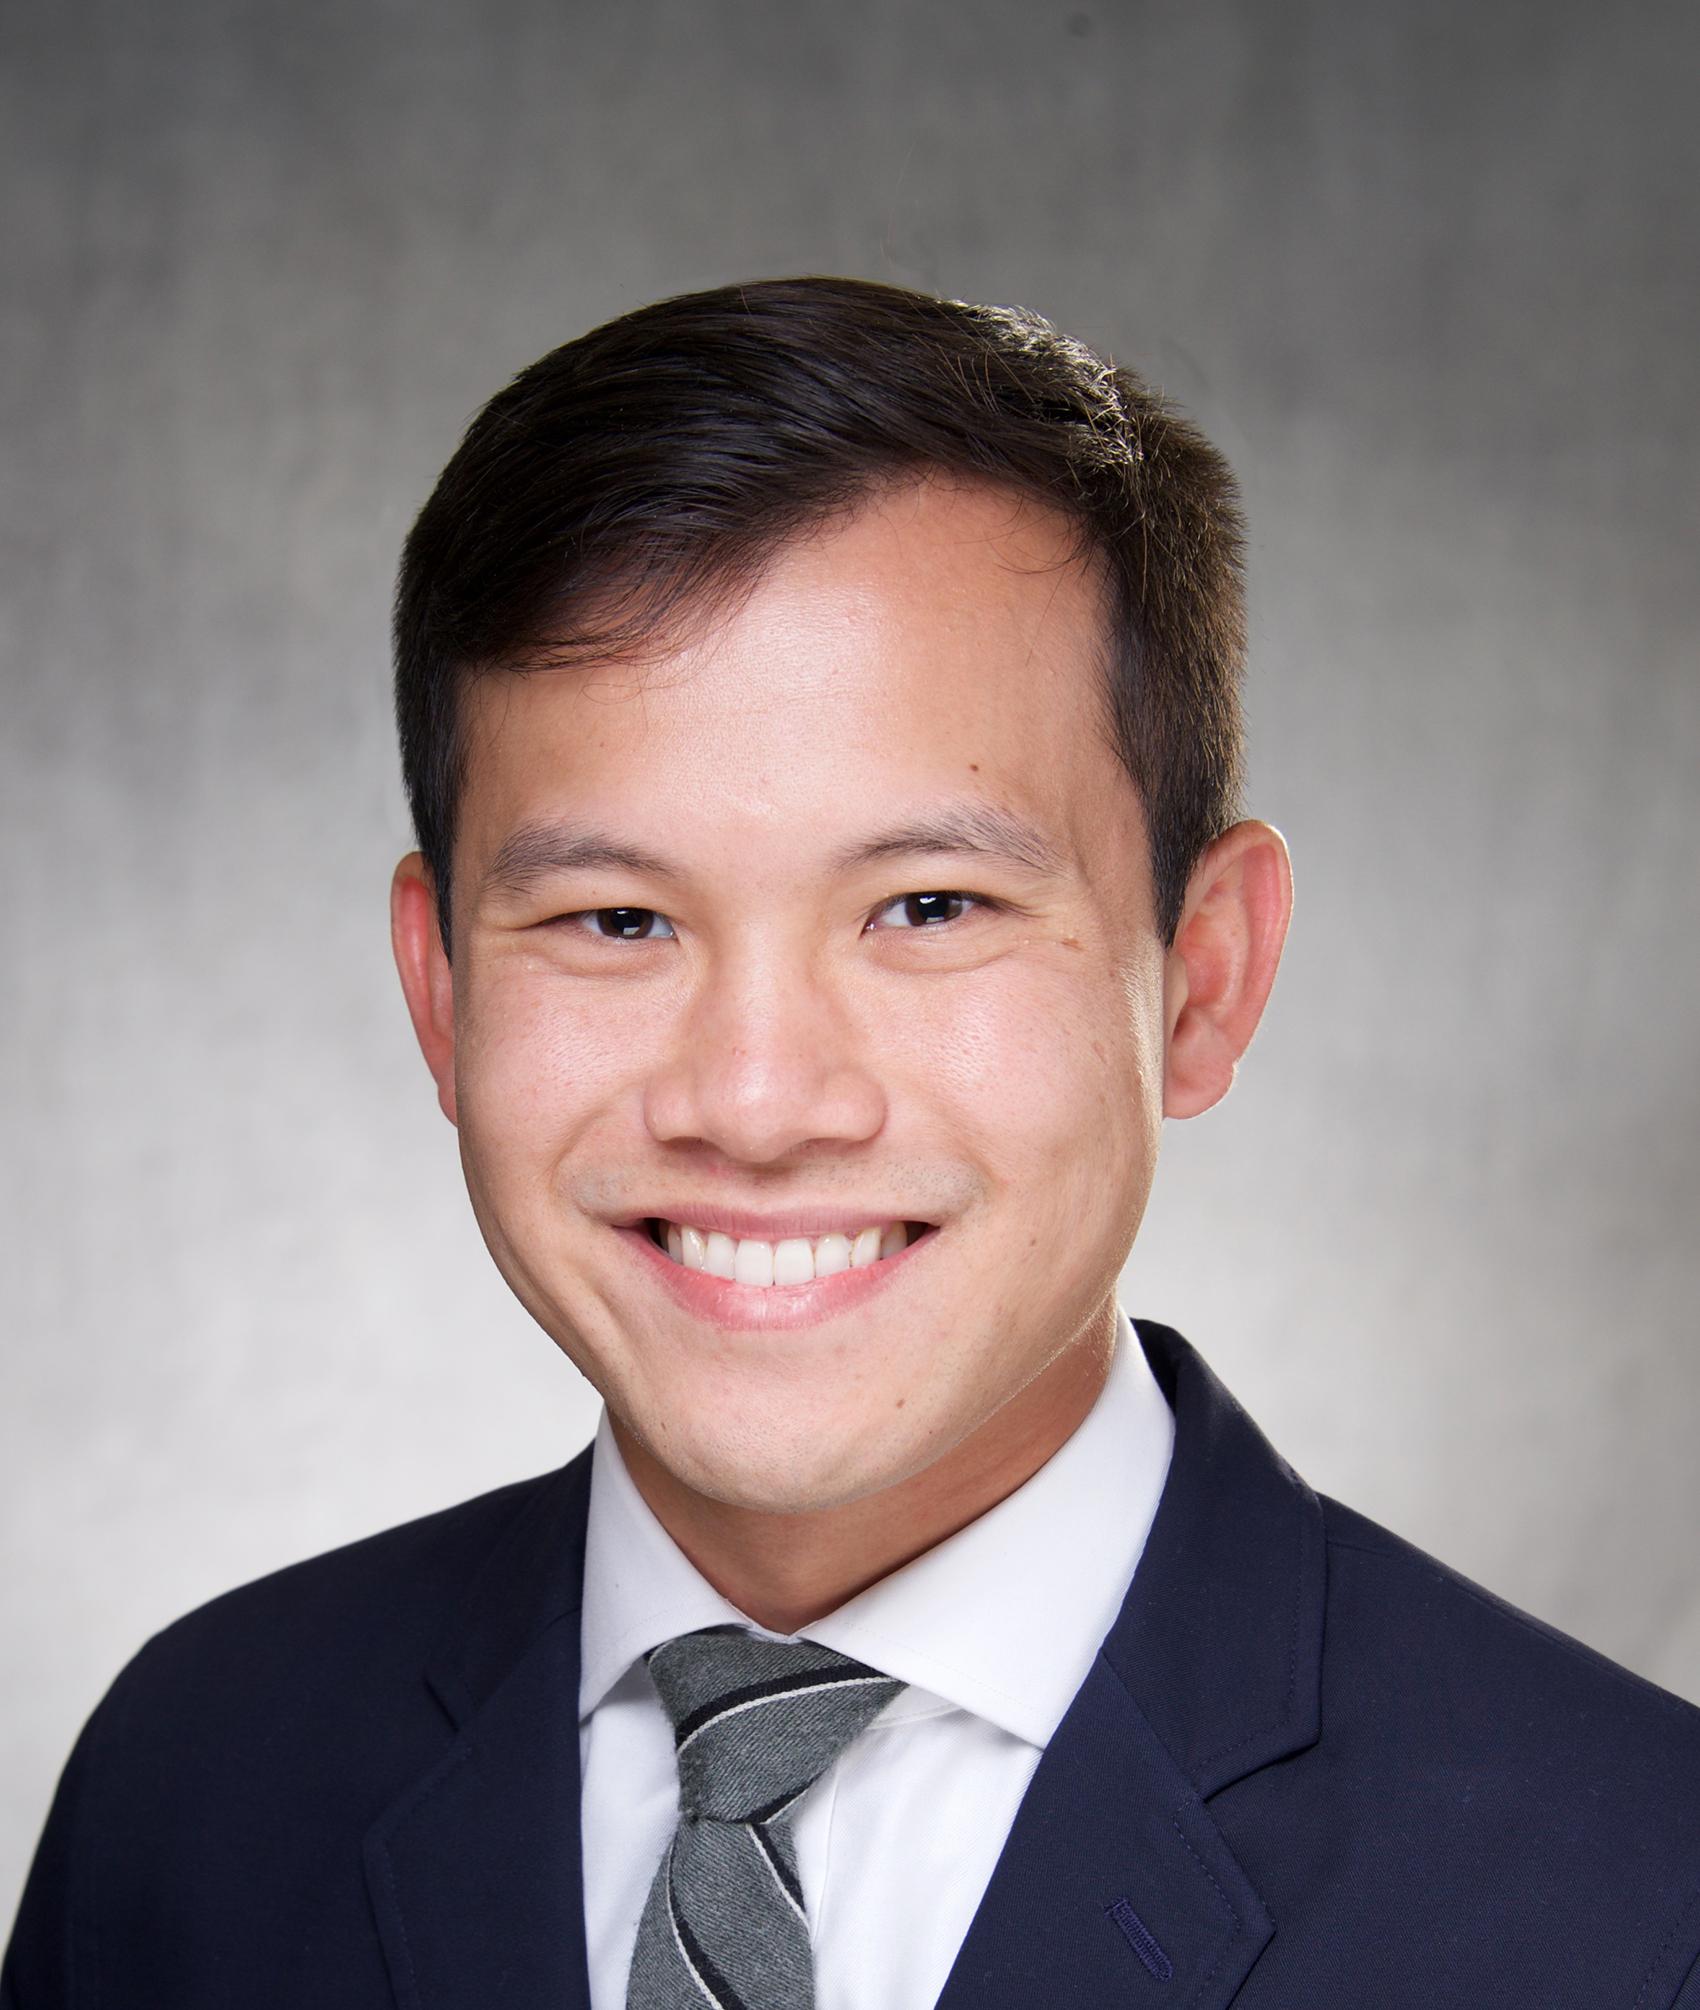 Anthony Chung, MD